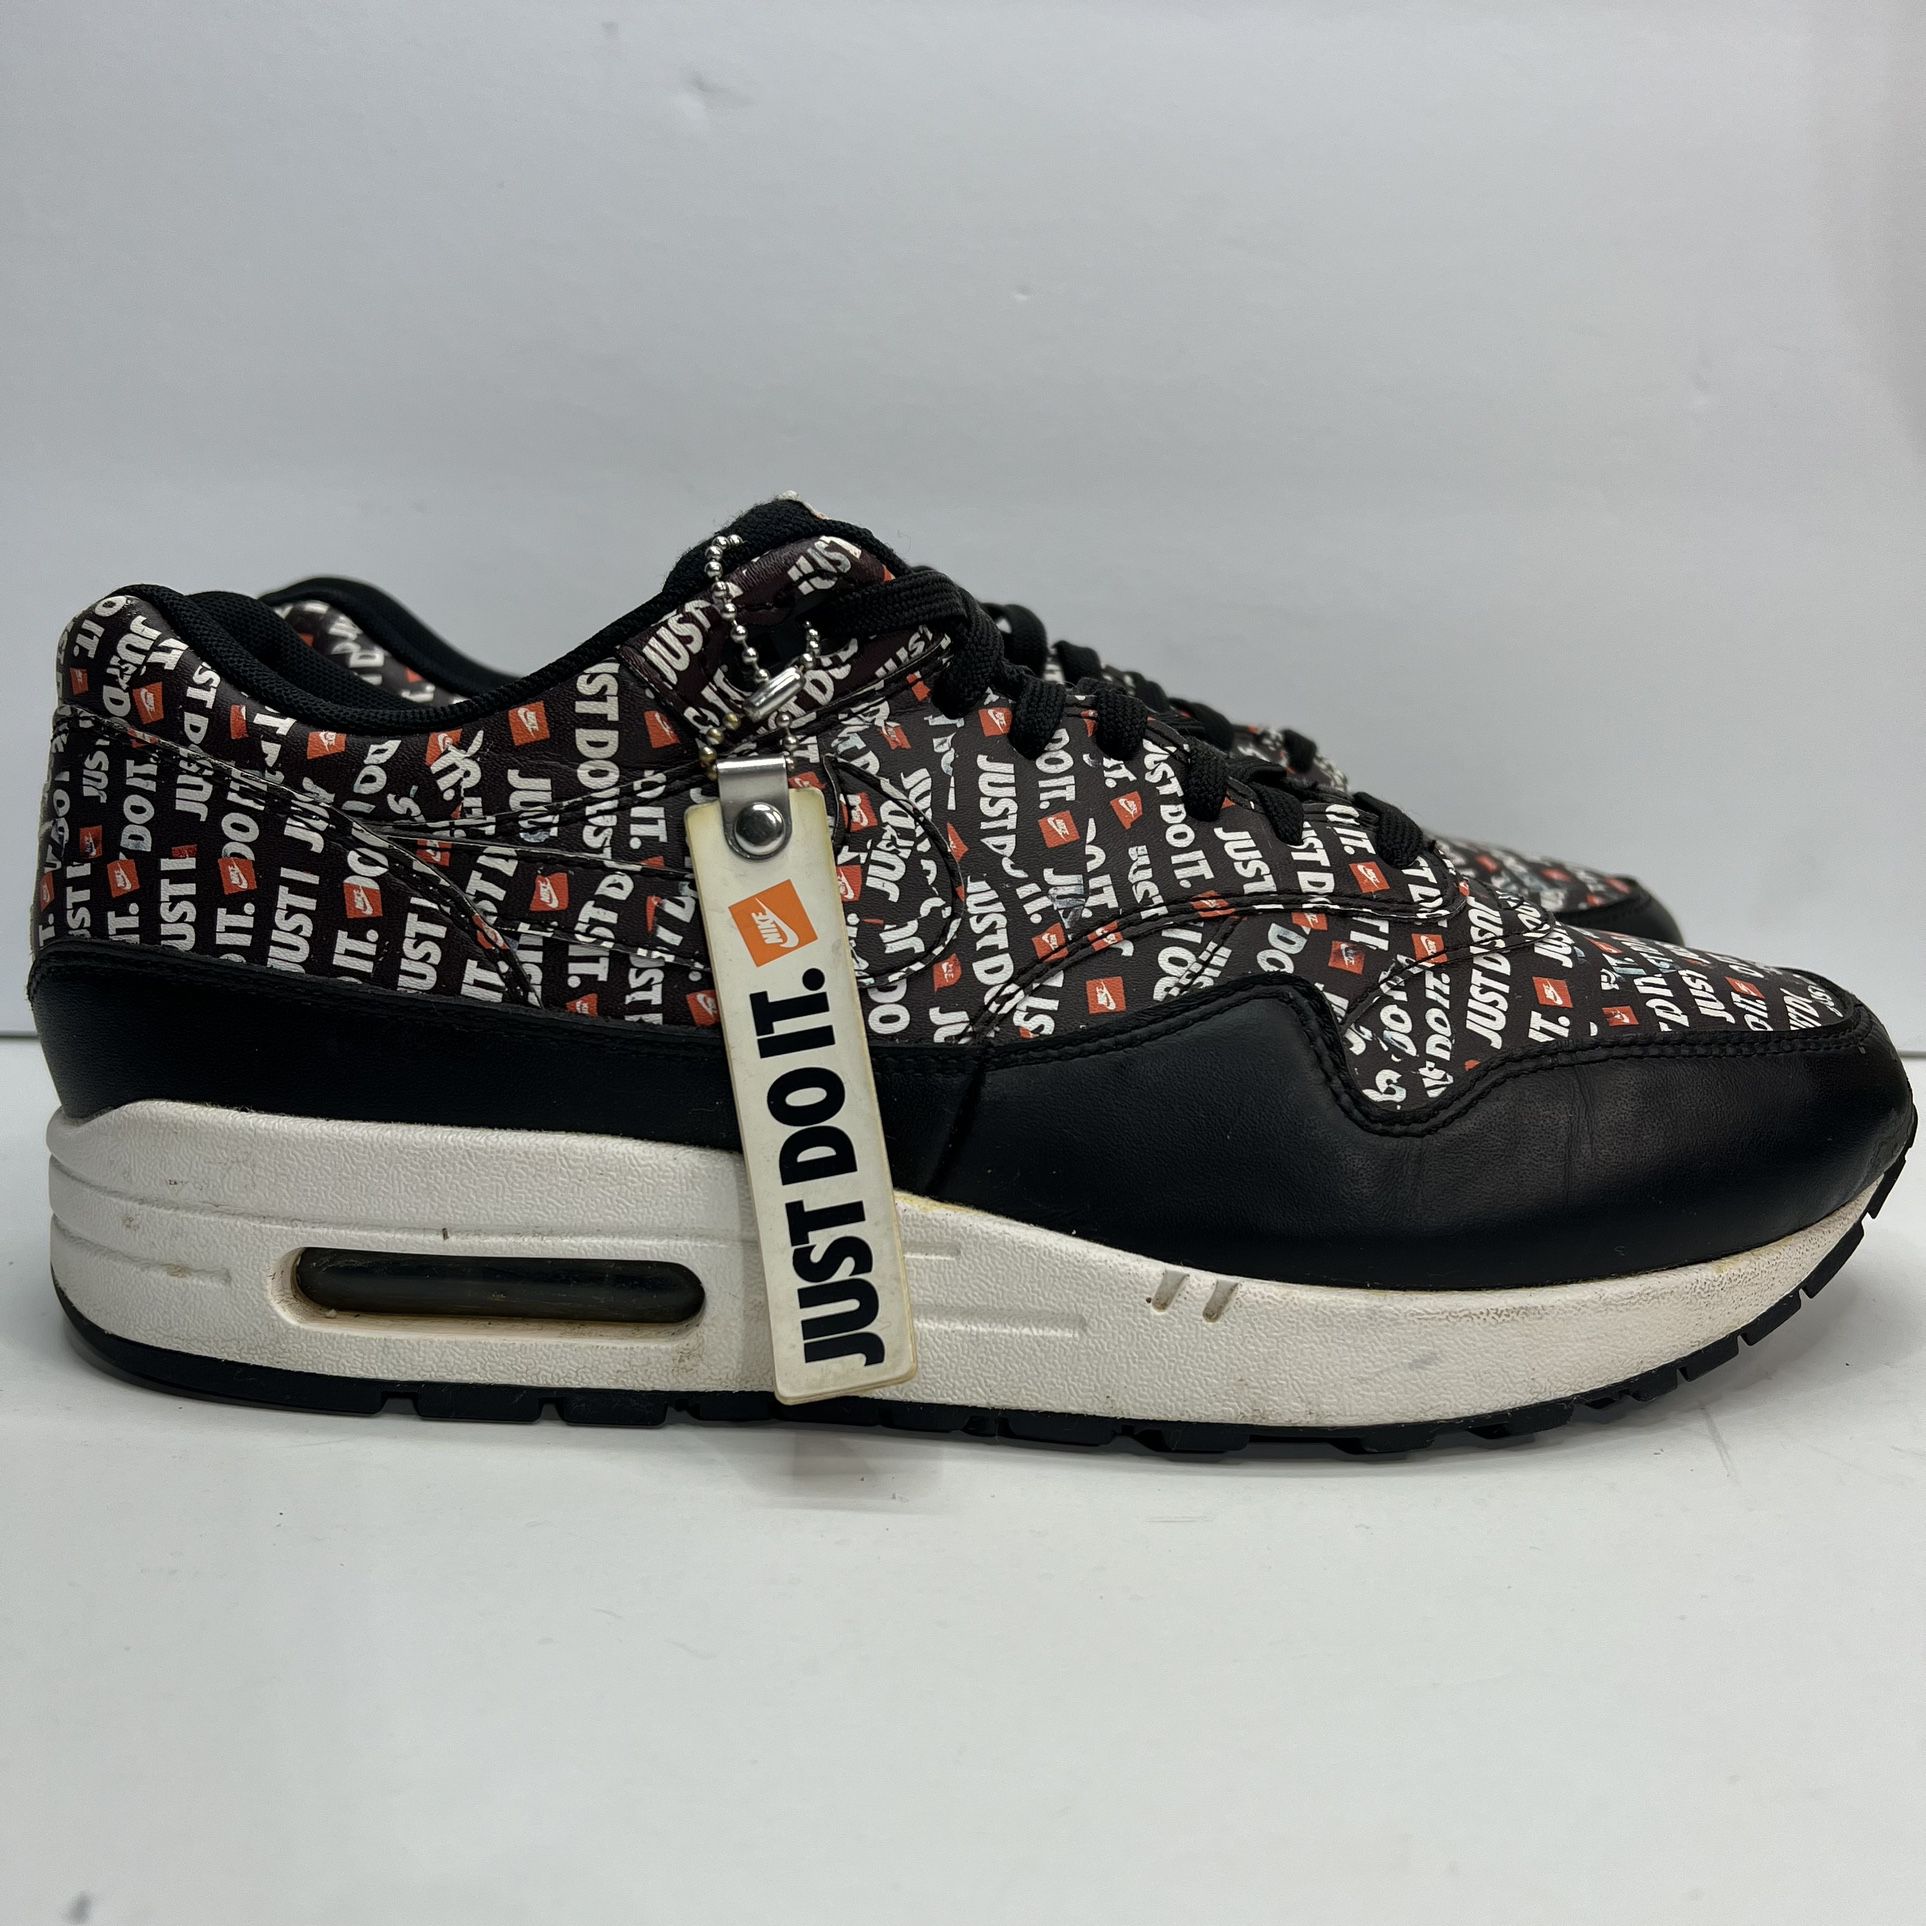 Nike Air Max 1 ‘Just Do It’ All Over Sneakers Shoes